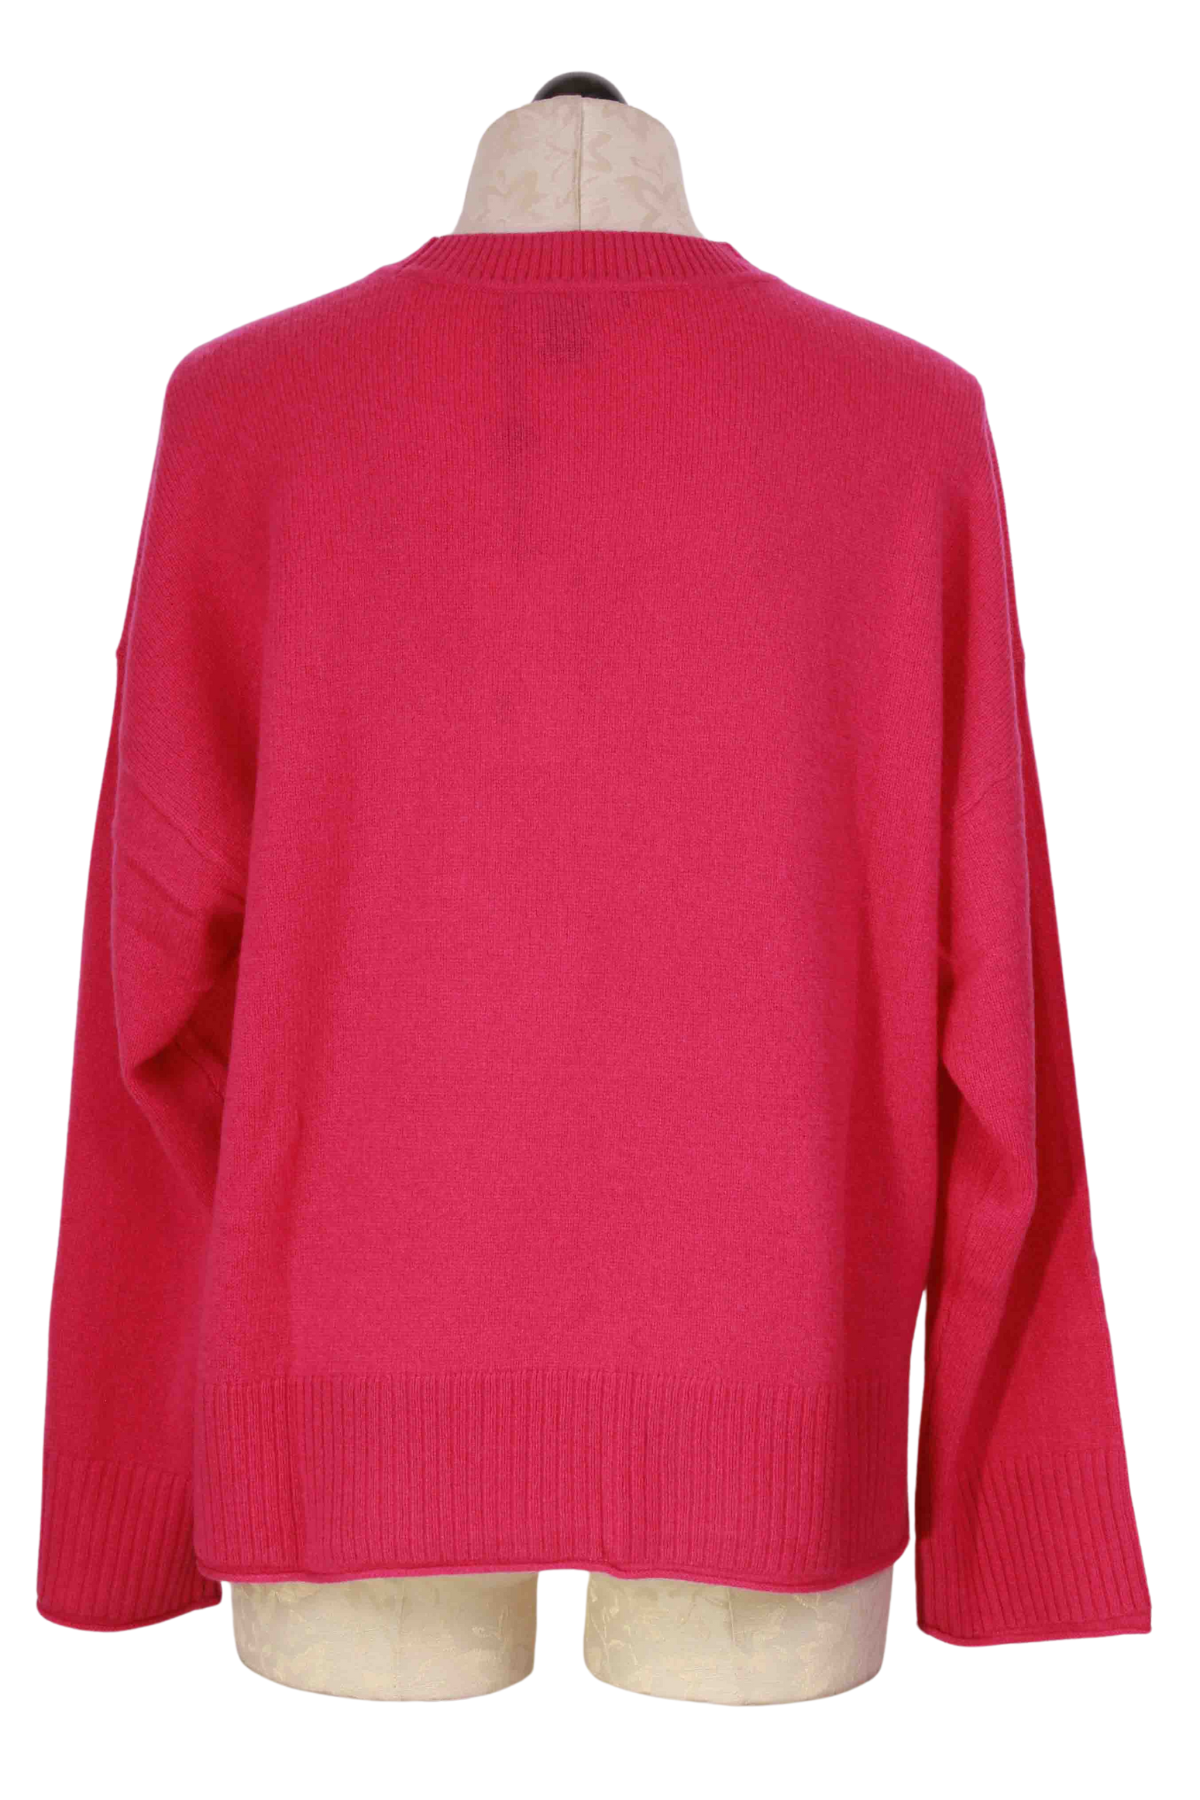 back view of Dragon Fruit Colored Emilia Crew Neck Sweater by Alashan Cashmere